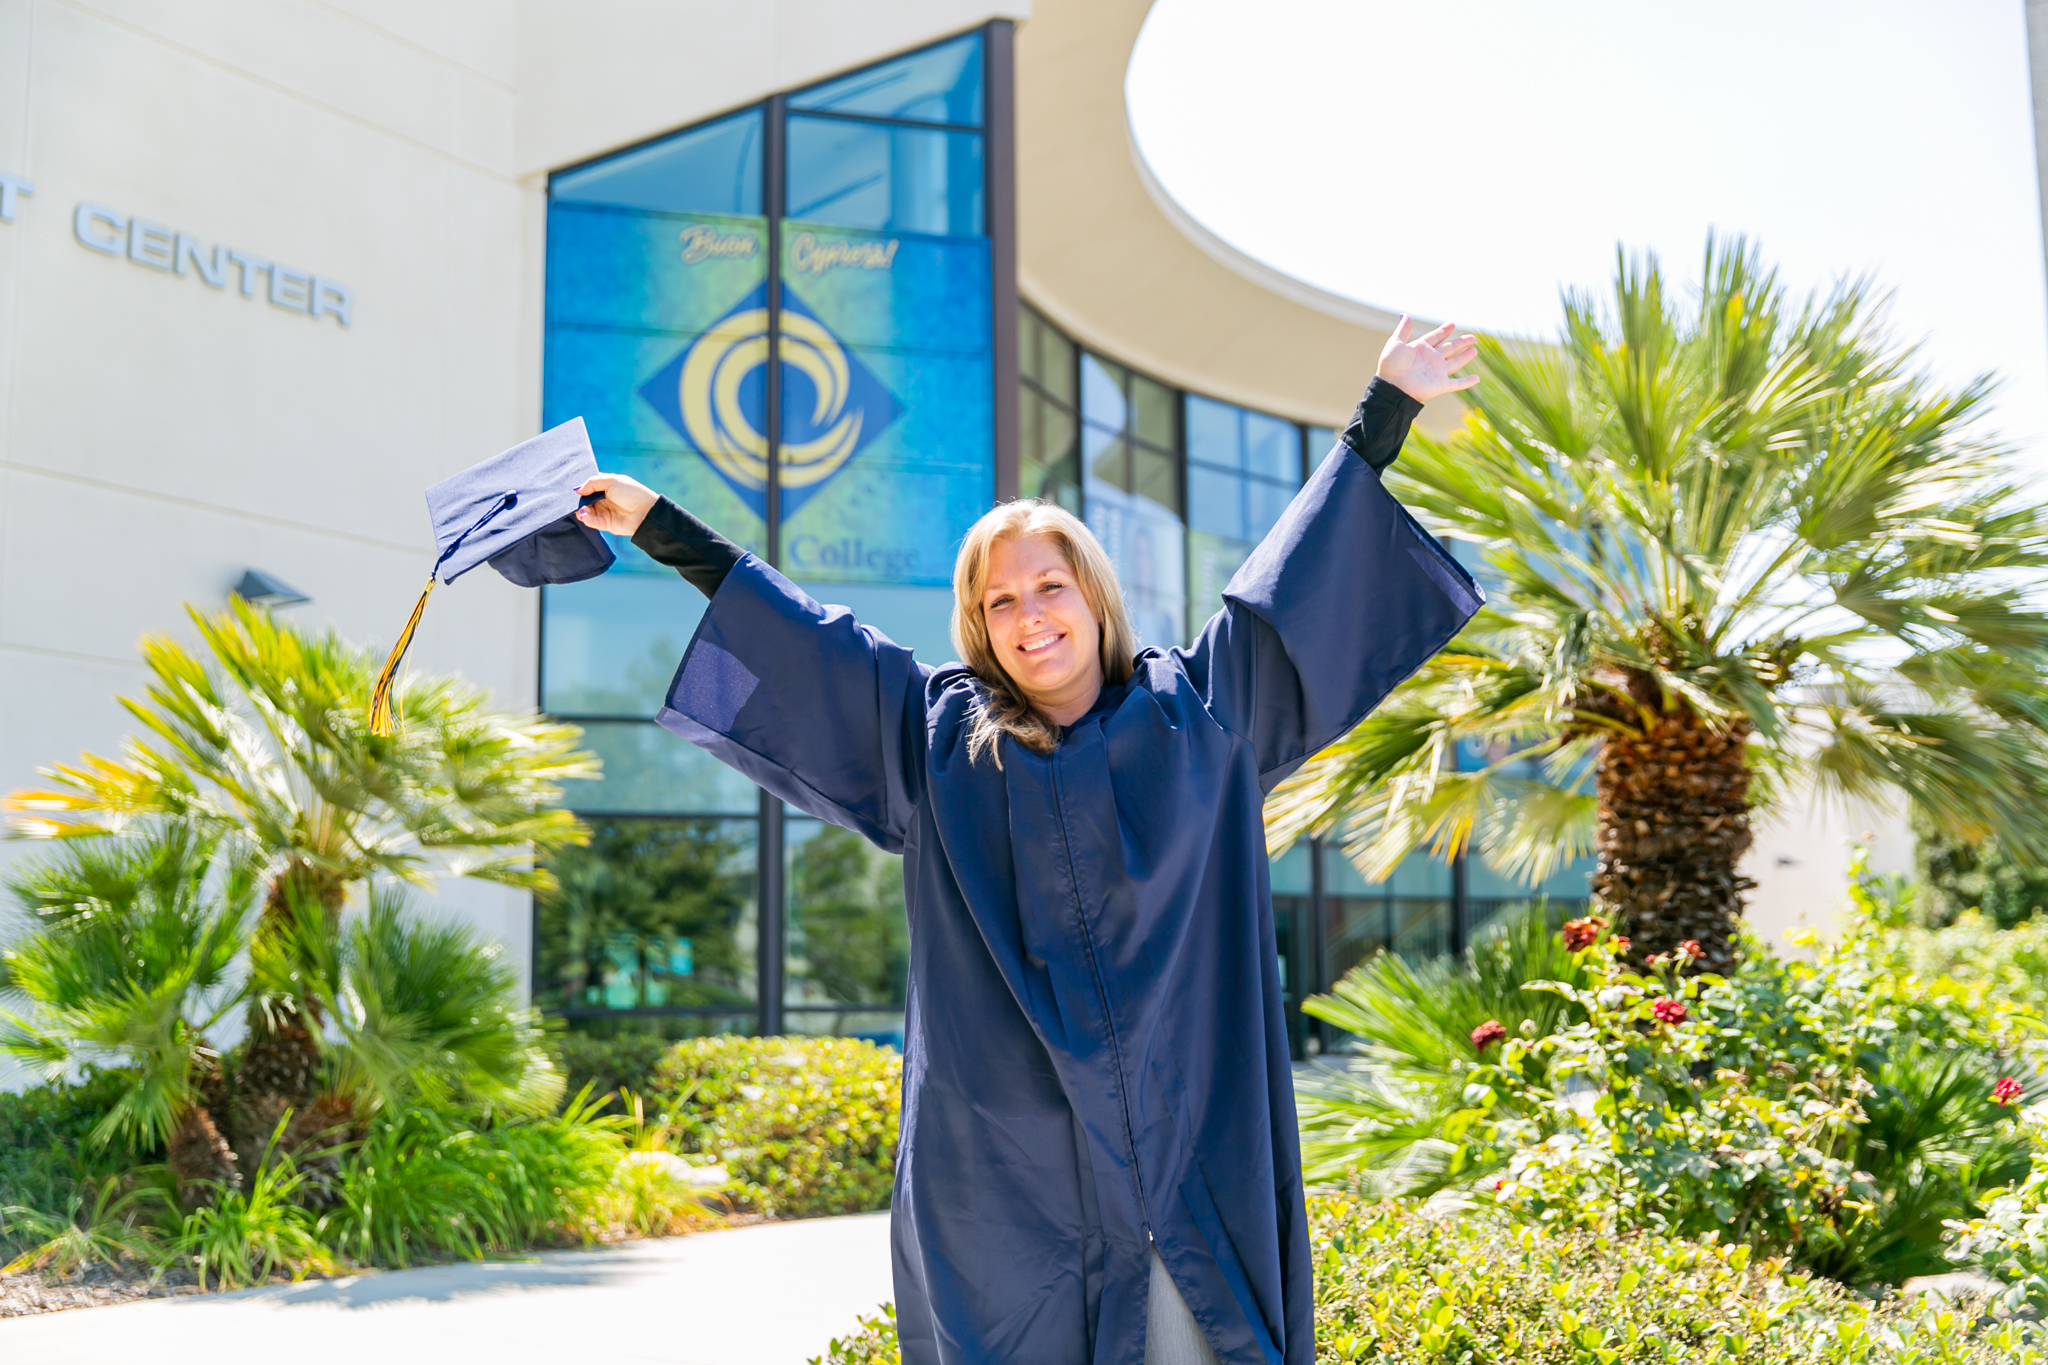 A woman, Emily Costello, in graduation garb raises her mortarboard above her head on the Cypress College campus.